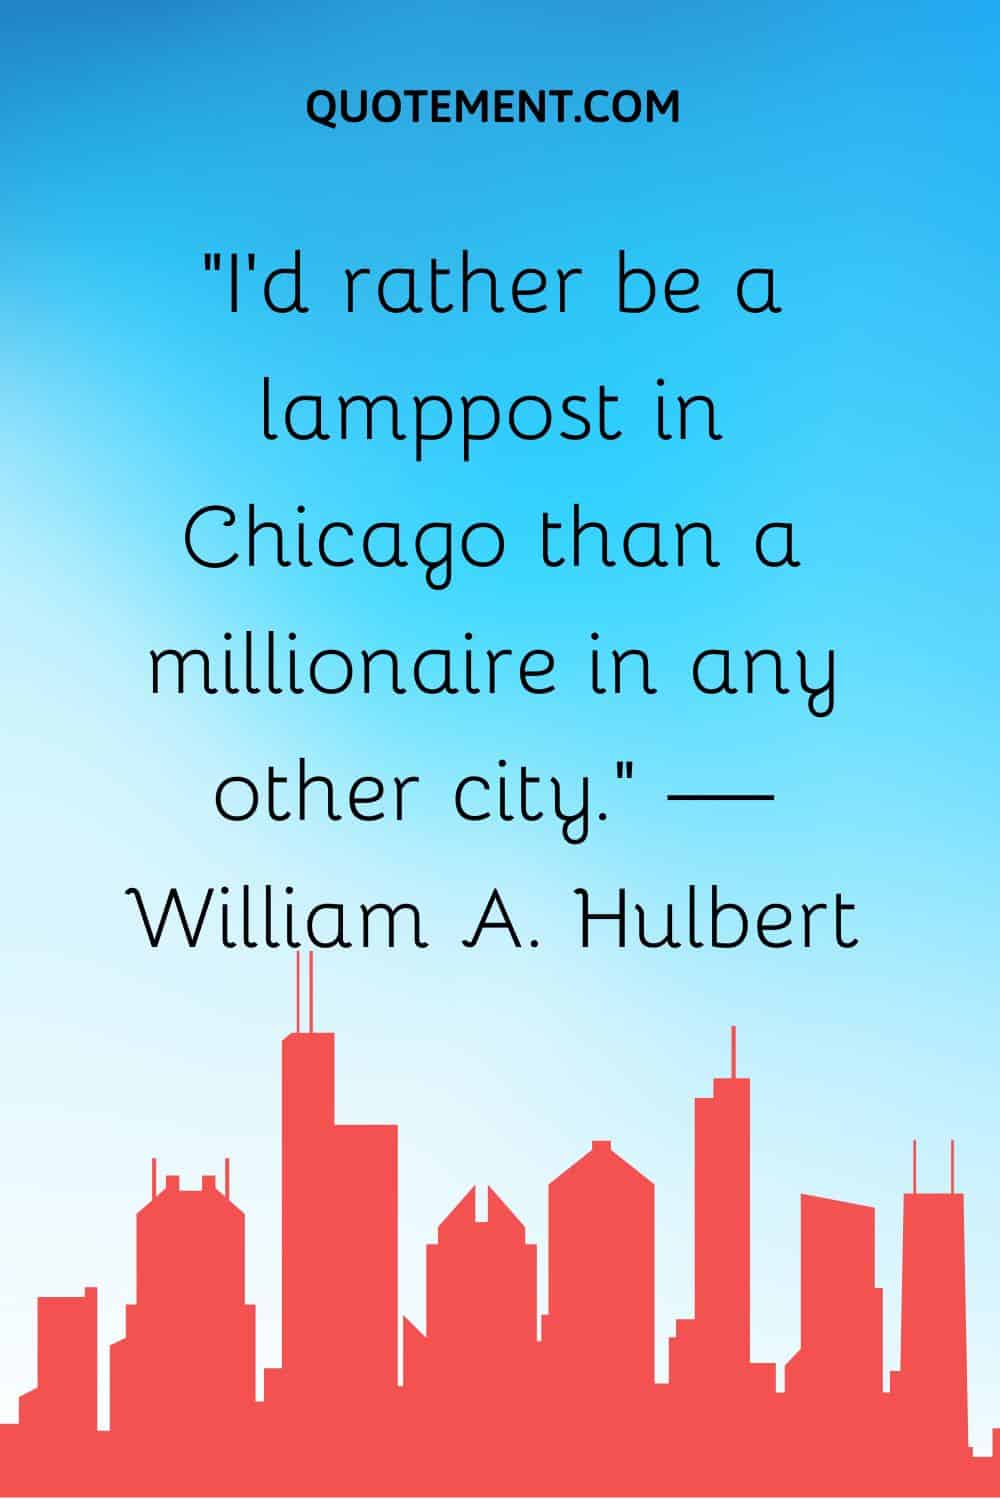 “I’d rather be a lamppost in Chicago than a millionaire in any other city.” — William A. Hulbert